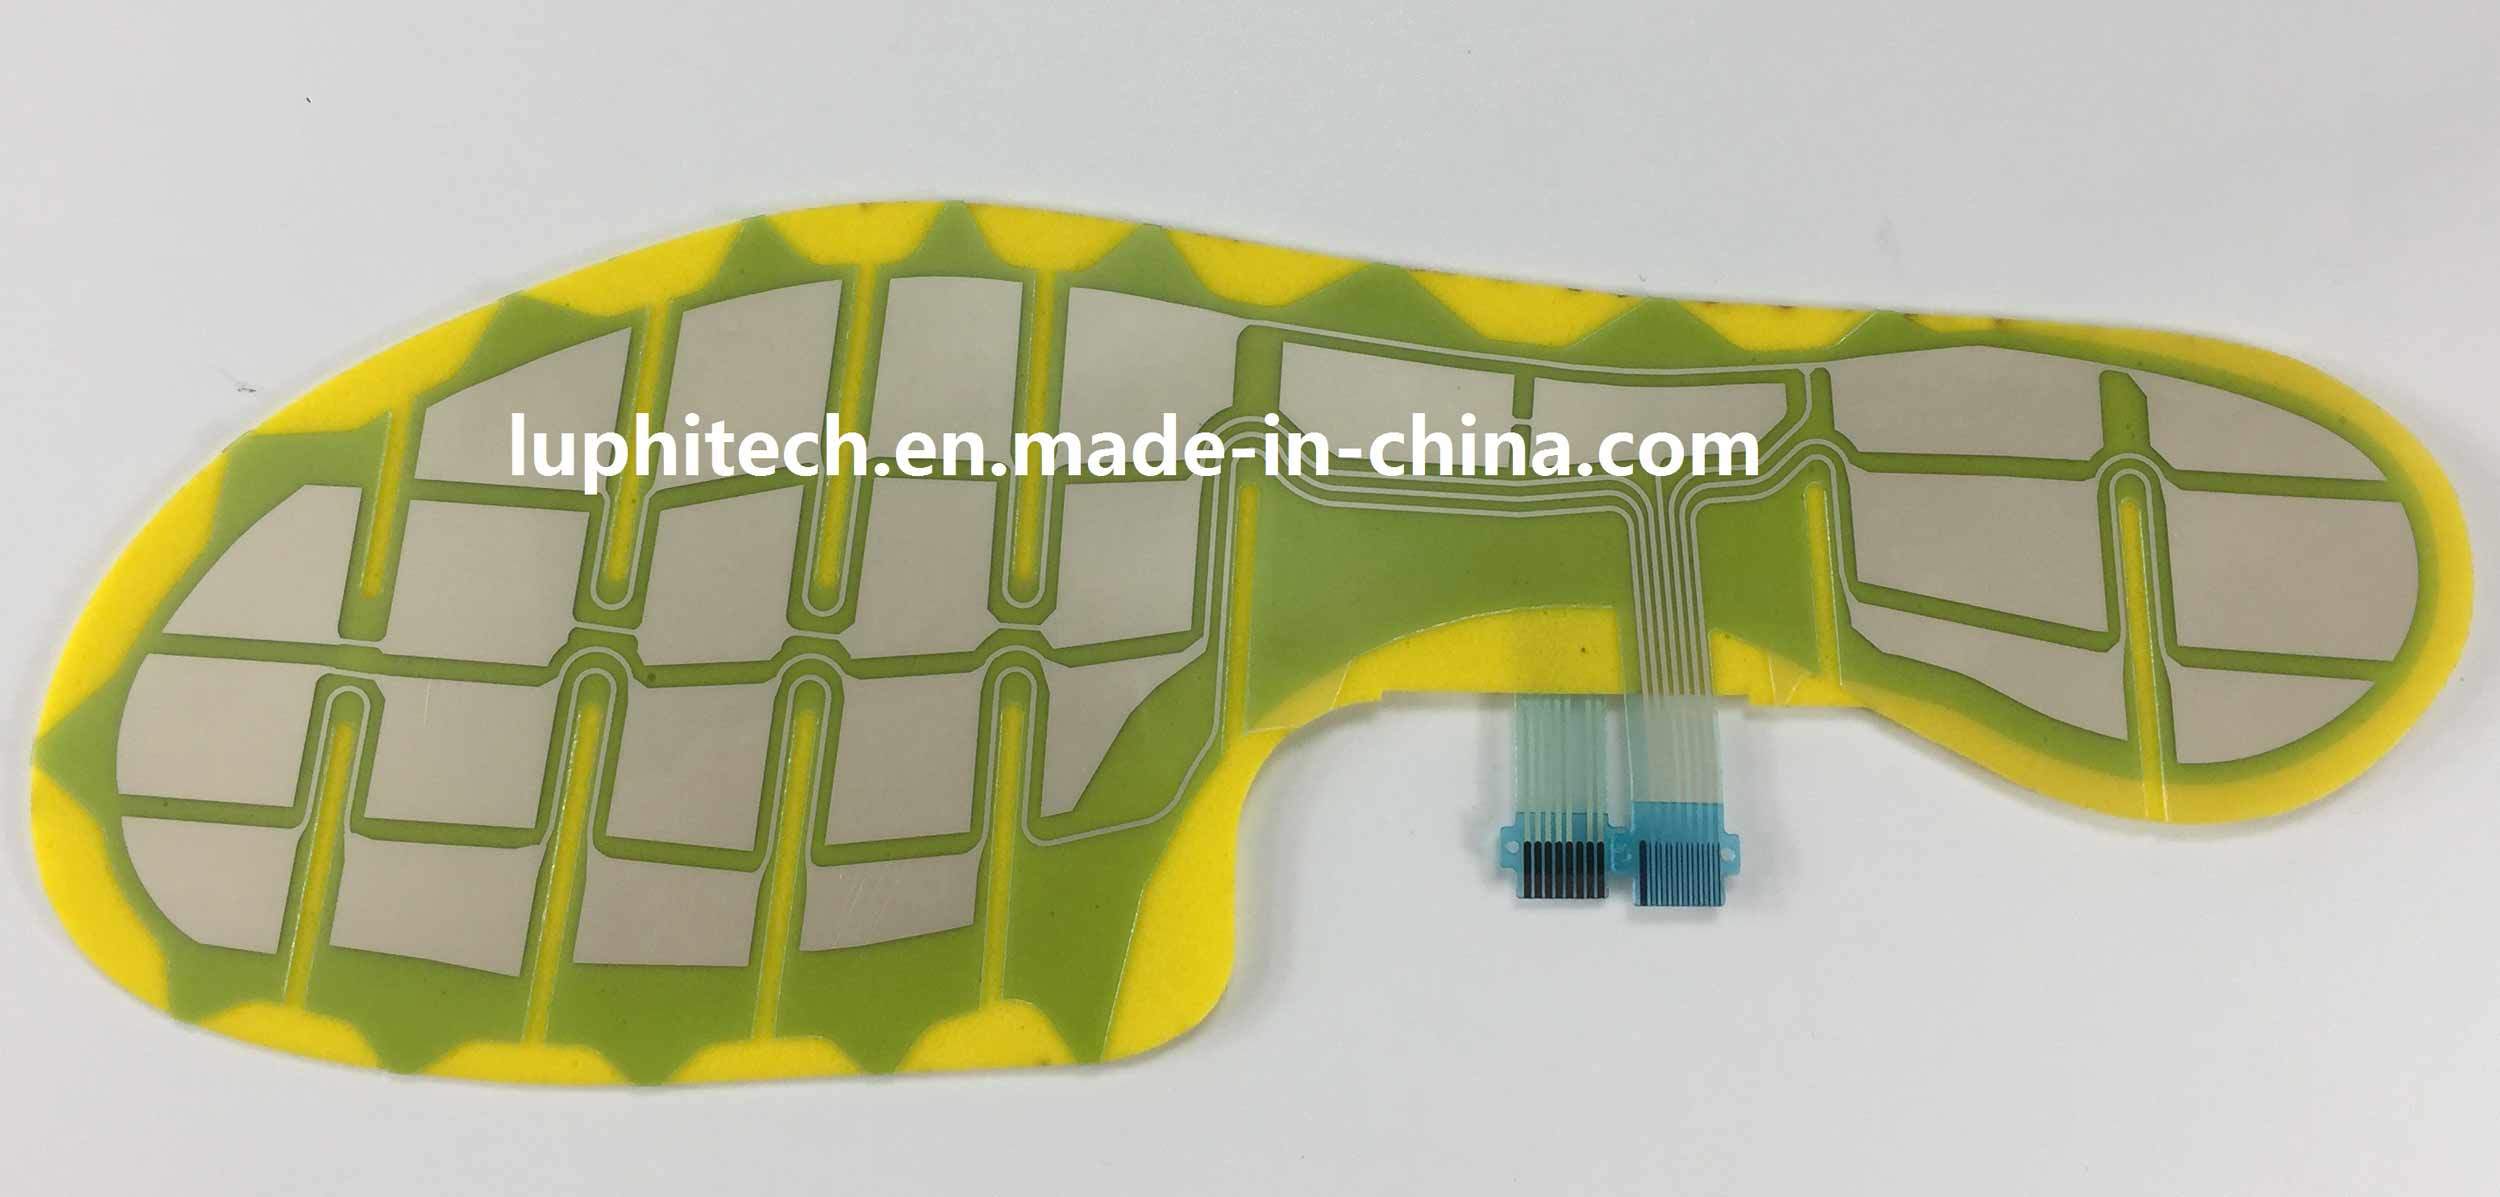 Customer Design and ODM Service Membrane Switch for Shoes